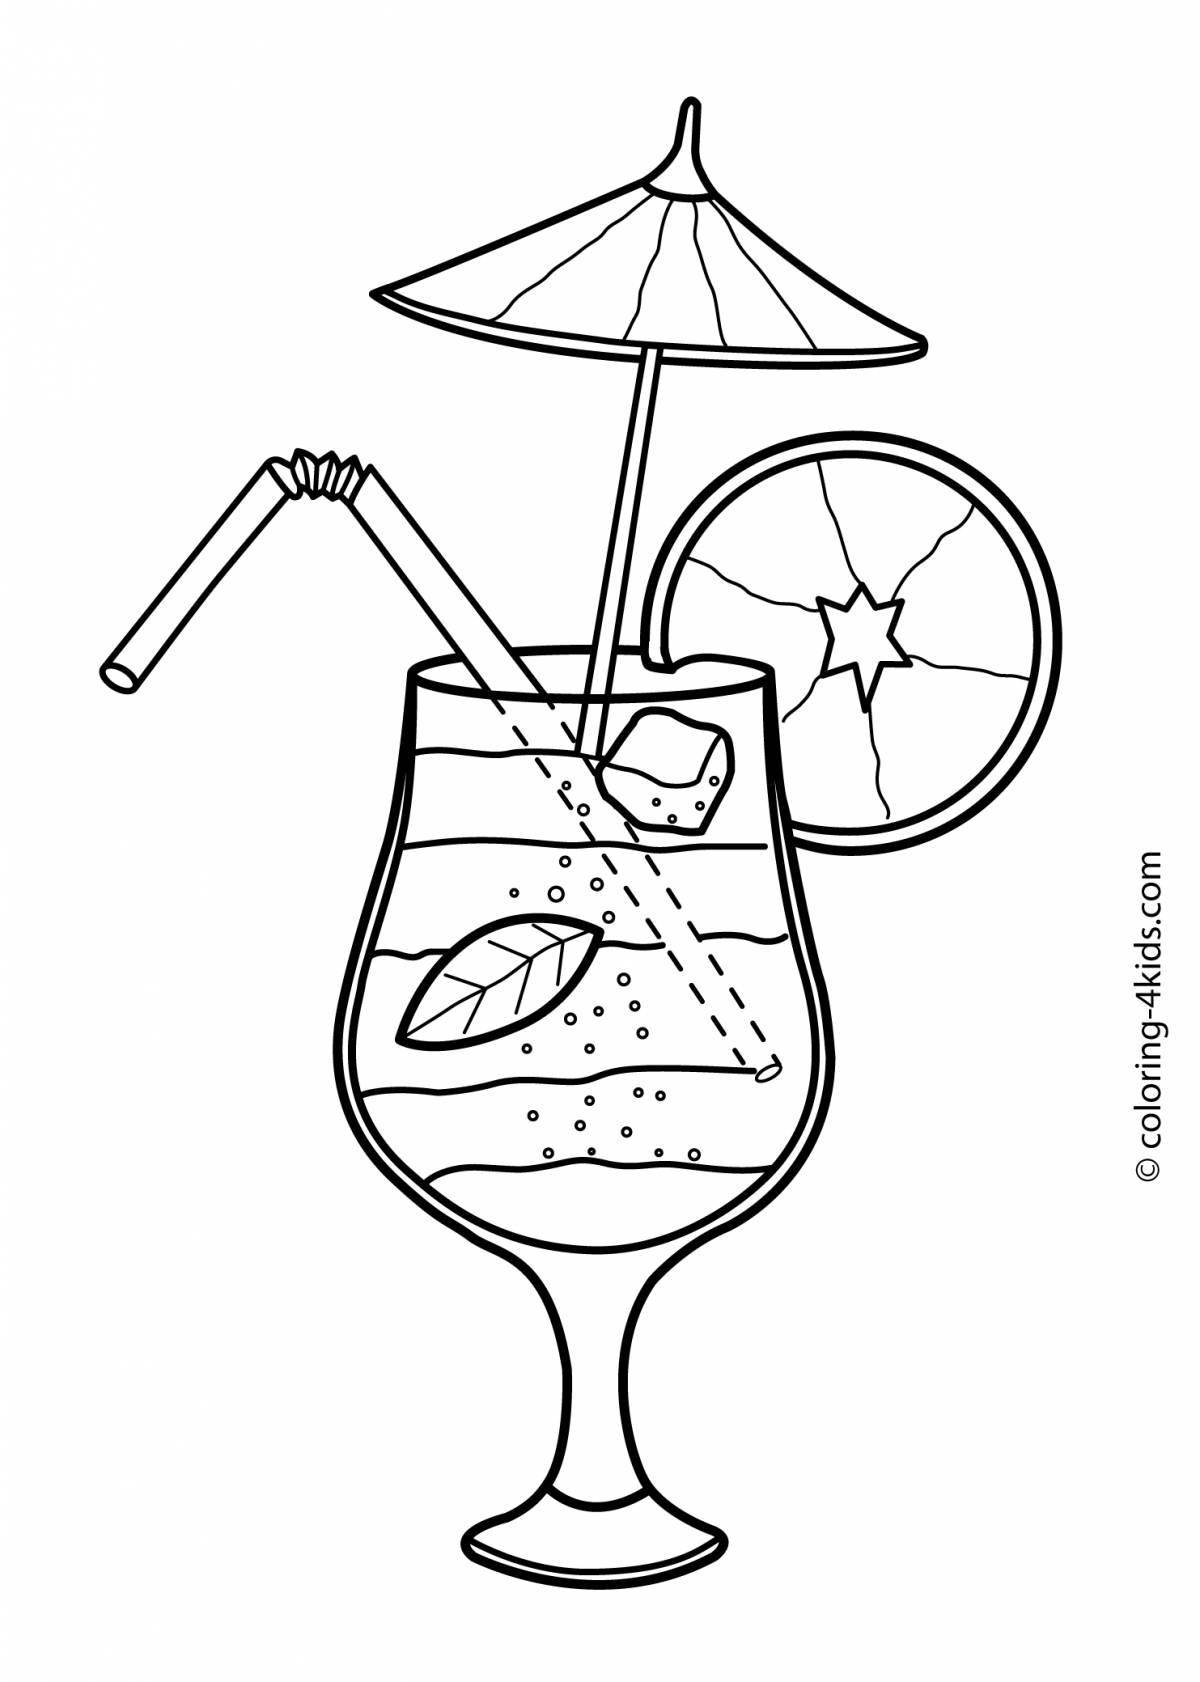 Nutritious drink coloring page